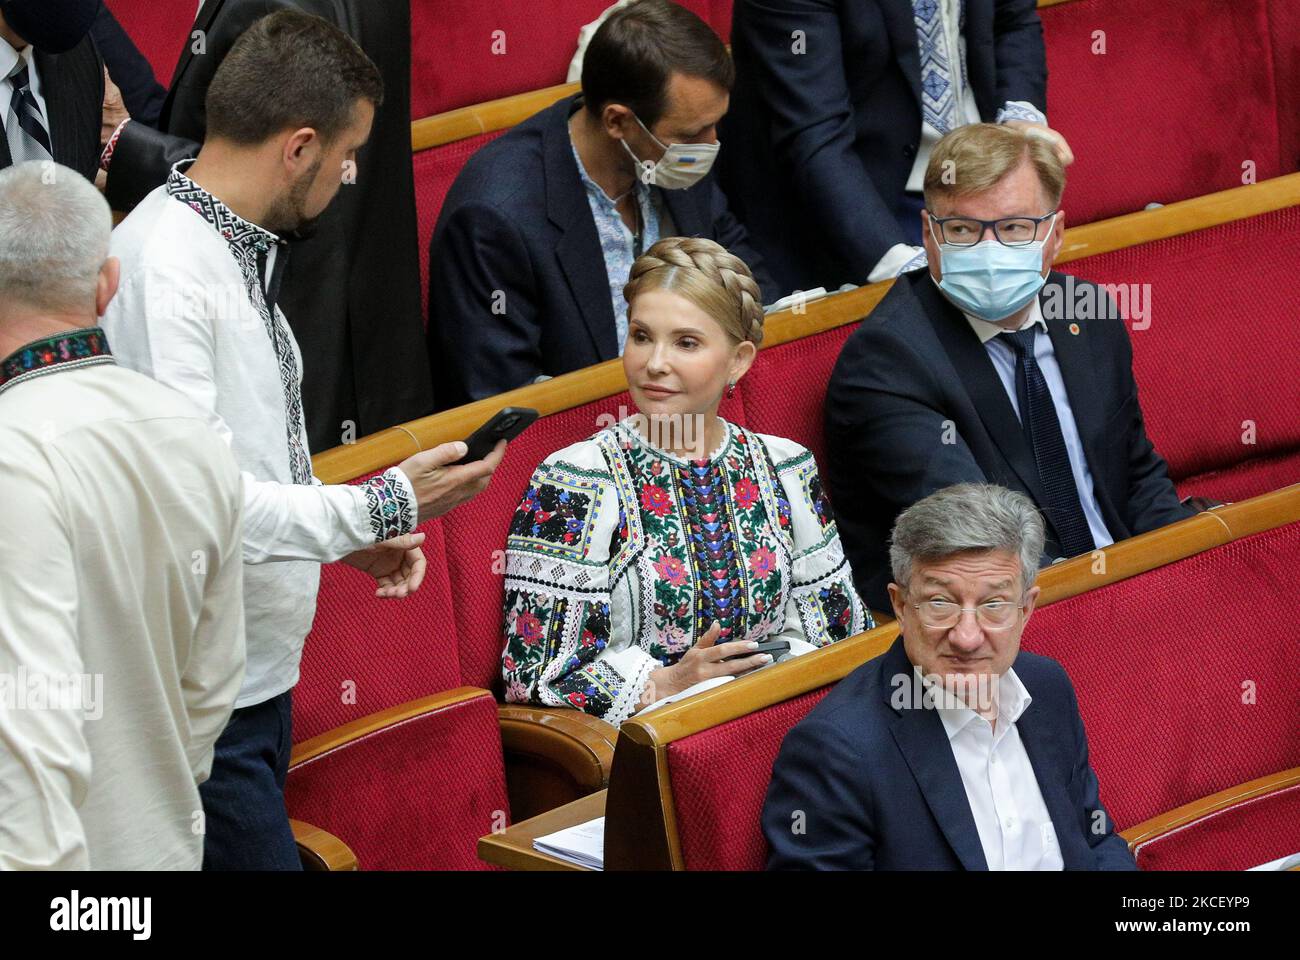 Lawmaker Yulia Tymoshenko attends the session where lawmakers approves ministers of Government Ministers of Health, Economy and Infrastructure in Kyiv, Ukraine, May 20, 2021. Ukrainian Parliament approved new ministers of Health, Economy and Infrastructure (Photo by Sergii Kharchenko/NurPhoto) Stock Photo